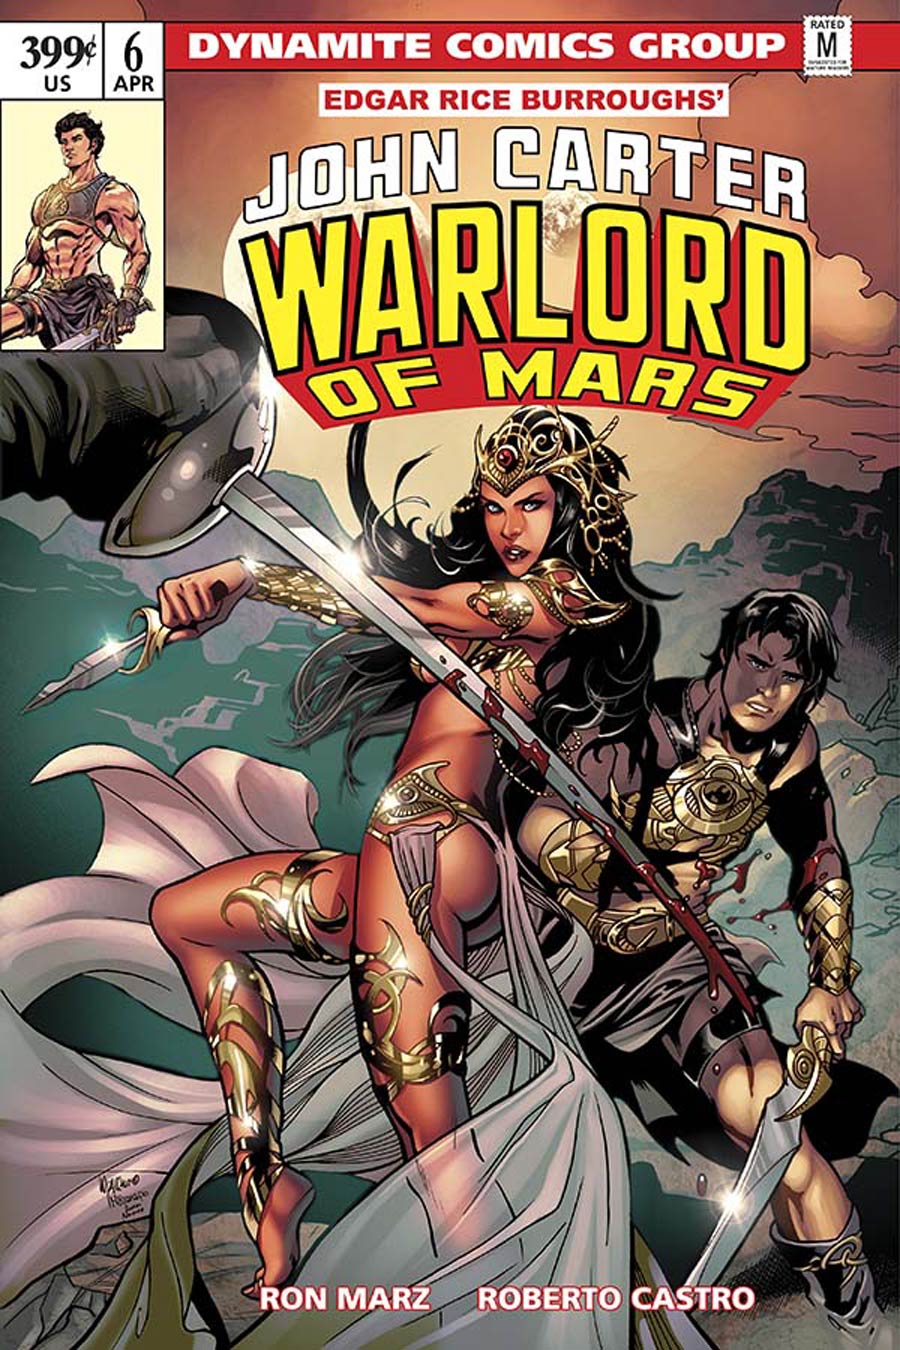 John Carter Warlord Of Mars Vol 2 #6 Cover C Variant Emanuela Lupacchino Cover